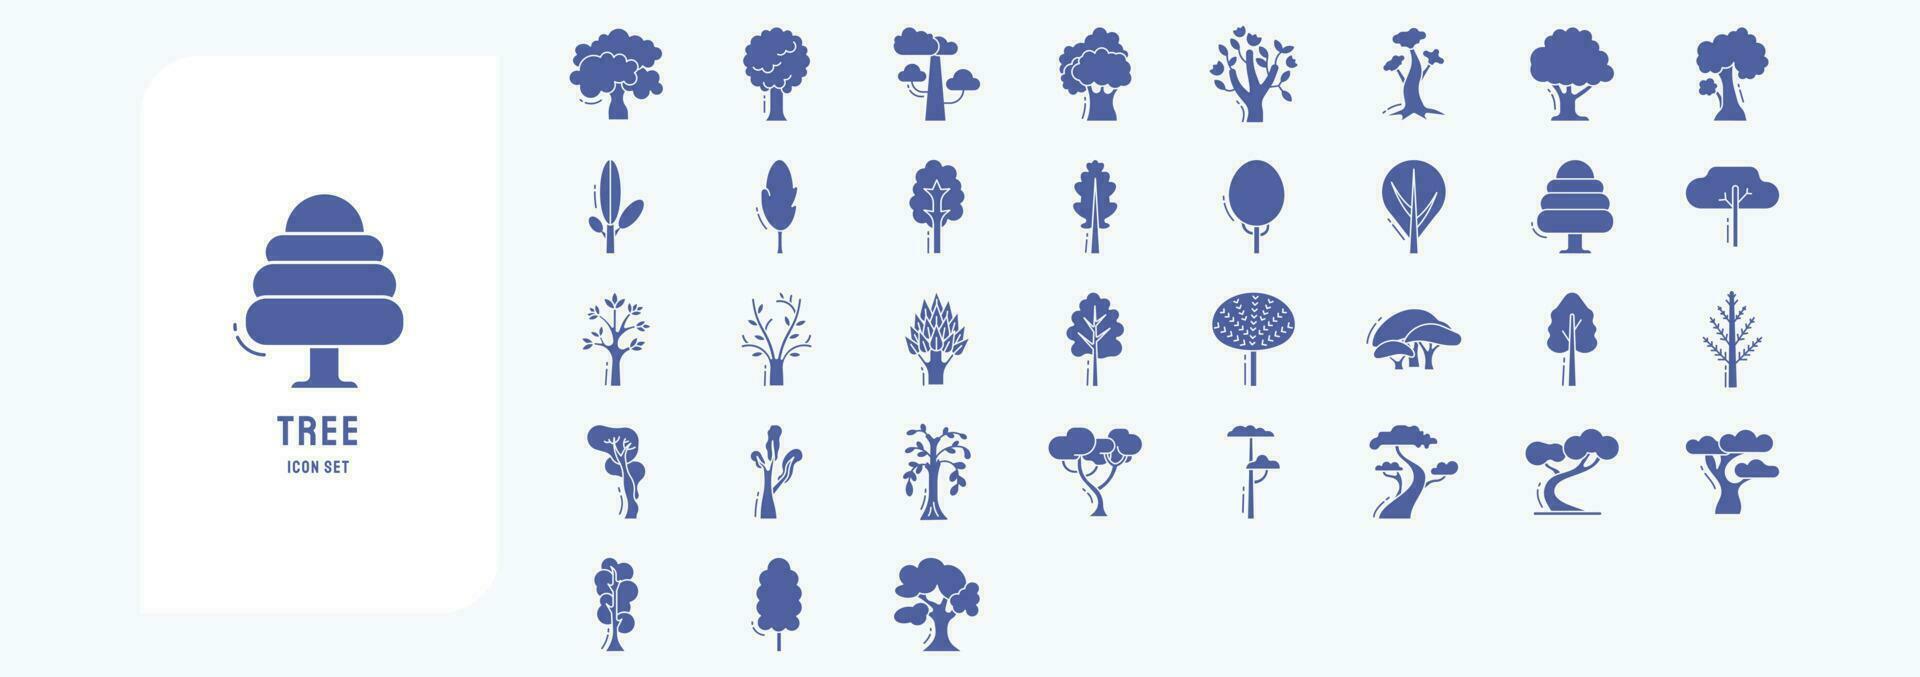 Collection of icons related to Tree, including icons like Apple, Locust, Magnolia, Maple and more vector